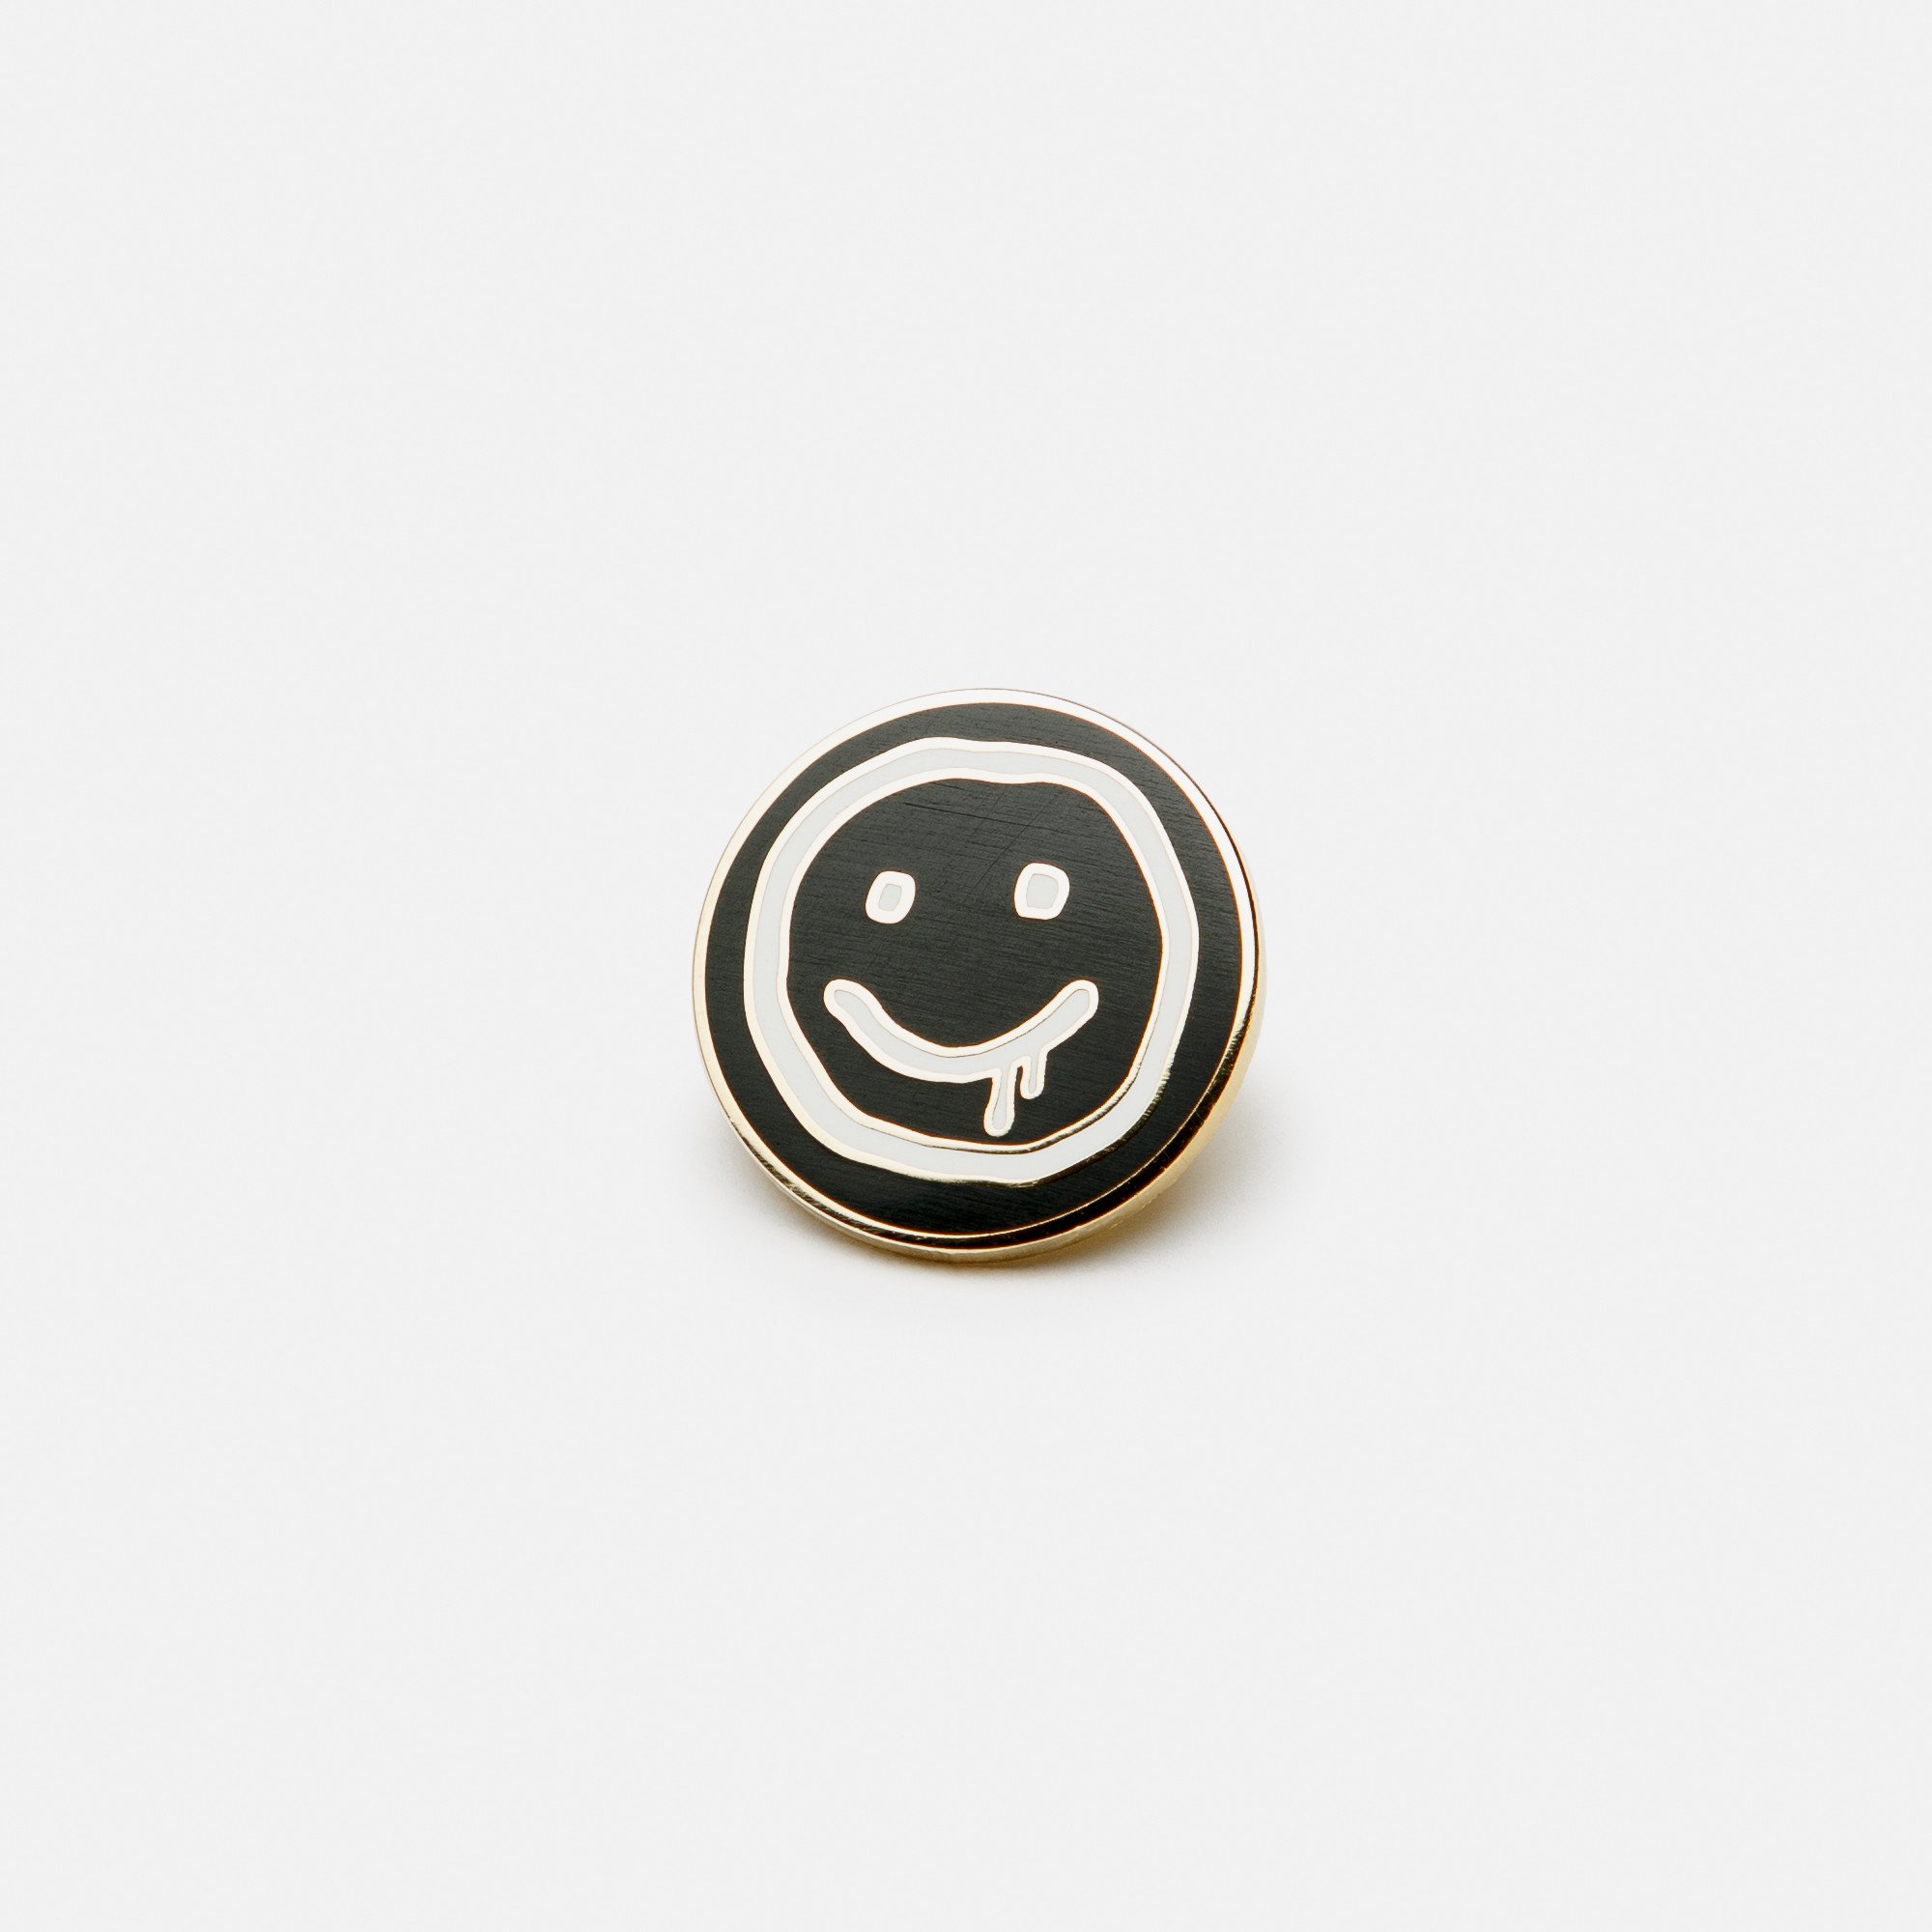 Awesome Smiley Pin